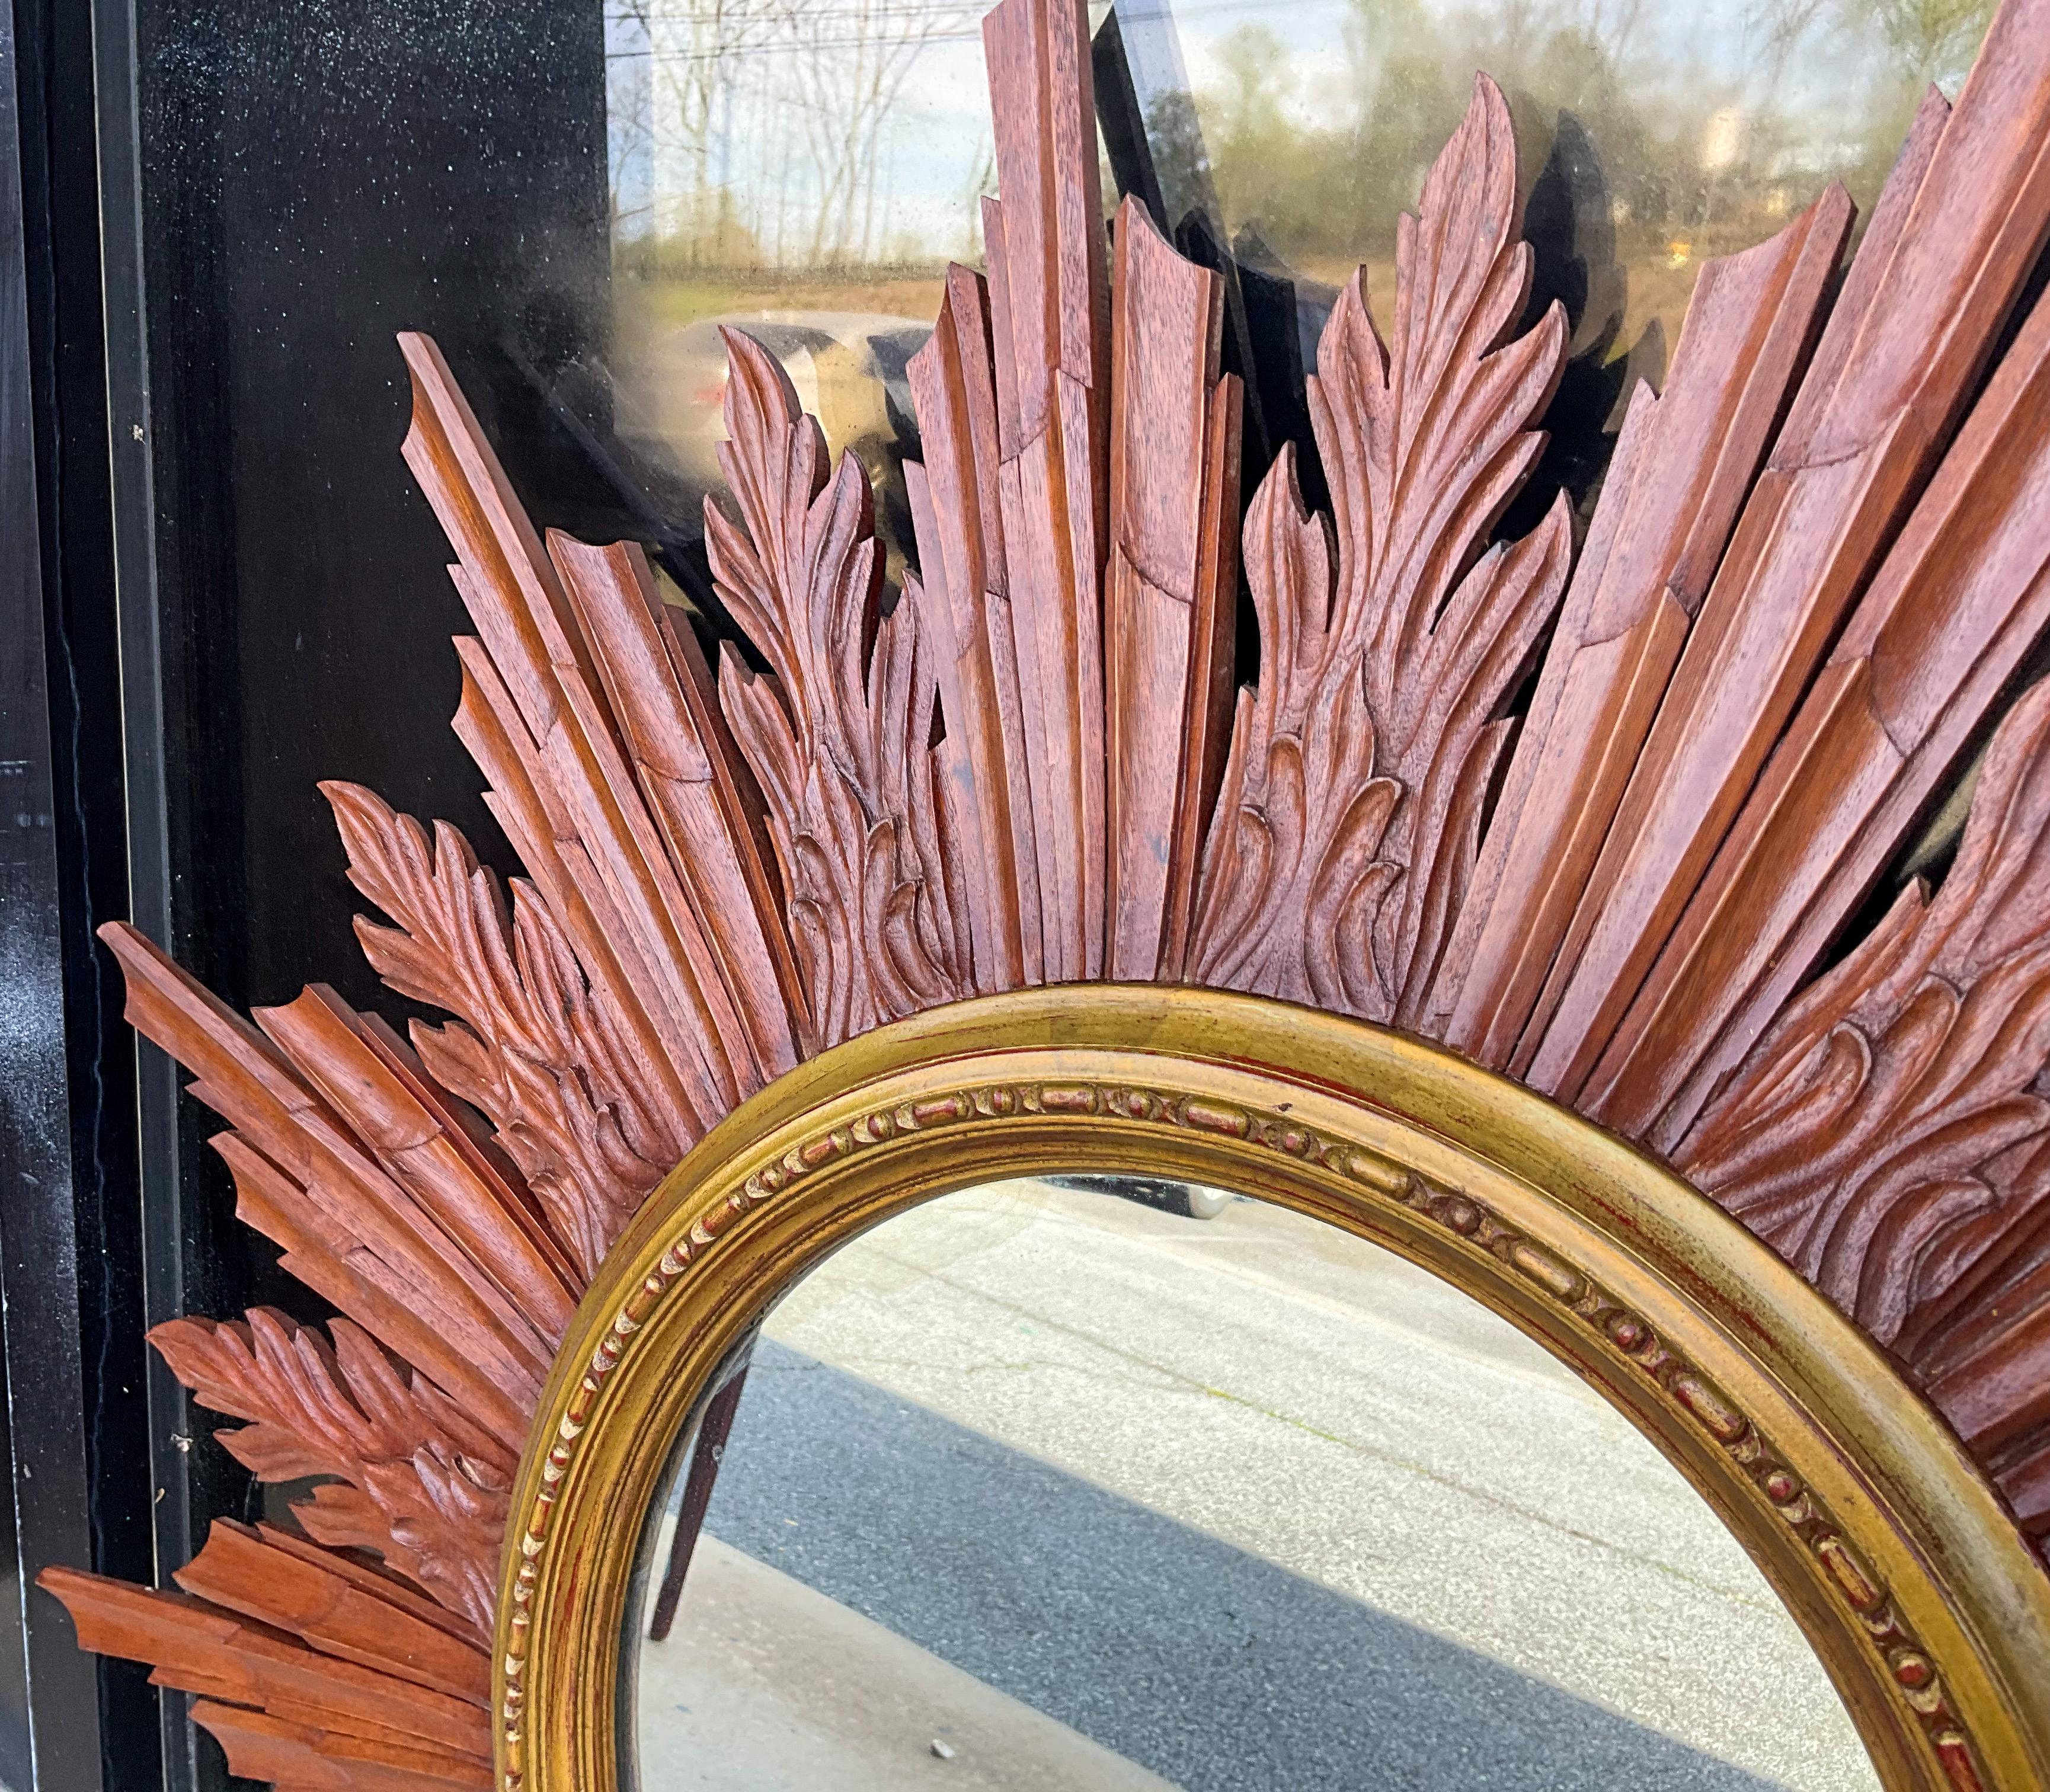 This is a large scale Italian giltwood and mahogany carved sunburst mirror. It appears to be in very good condition and is unmarked. I think the two tone combination of wood and giltwood gives it a special quality that makes it stand apart from the